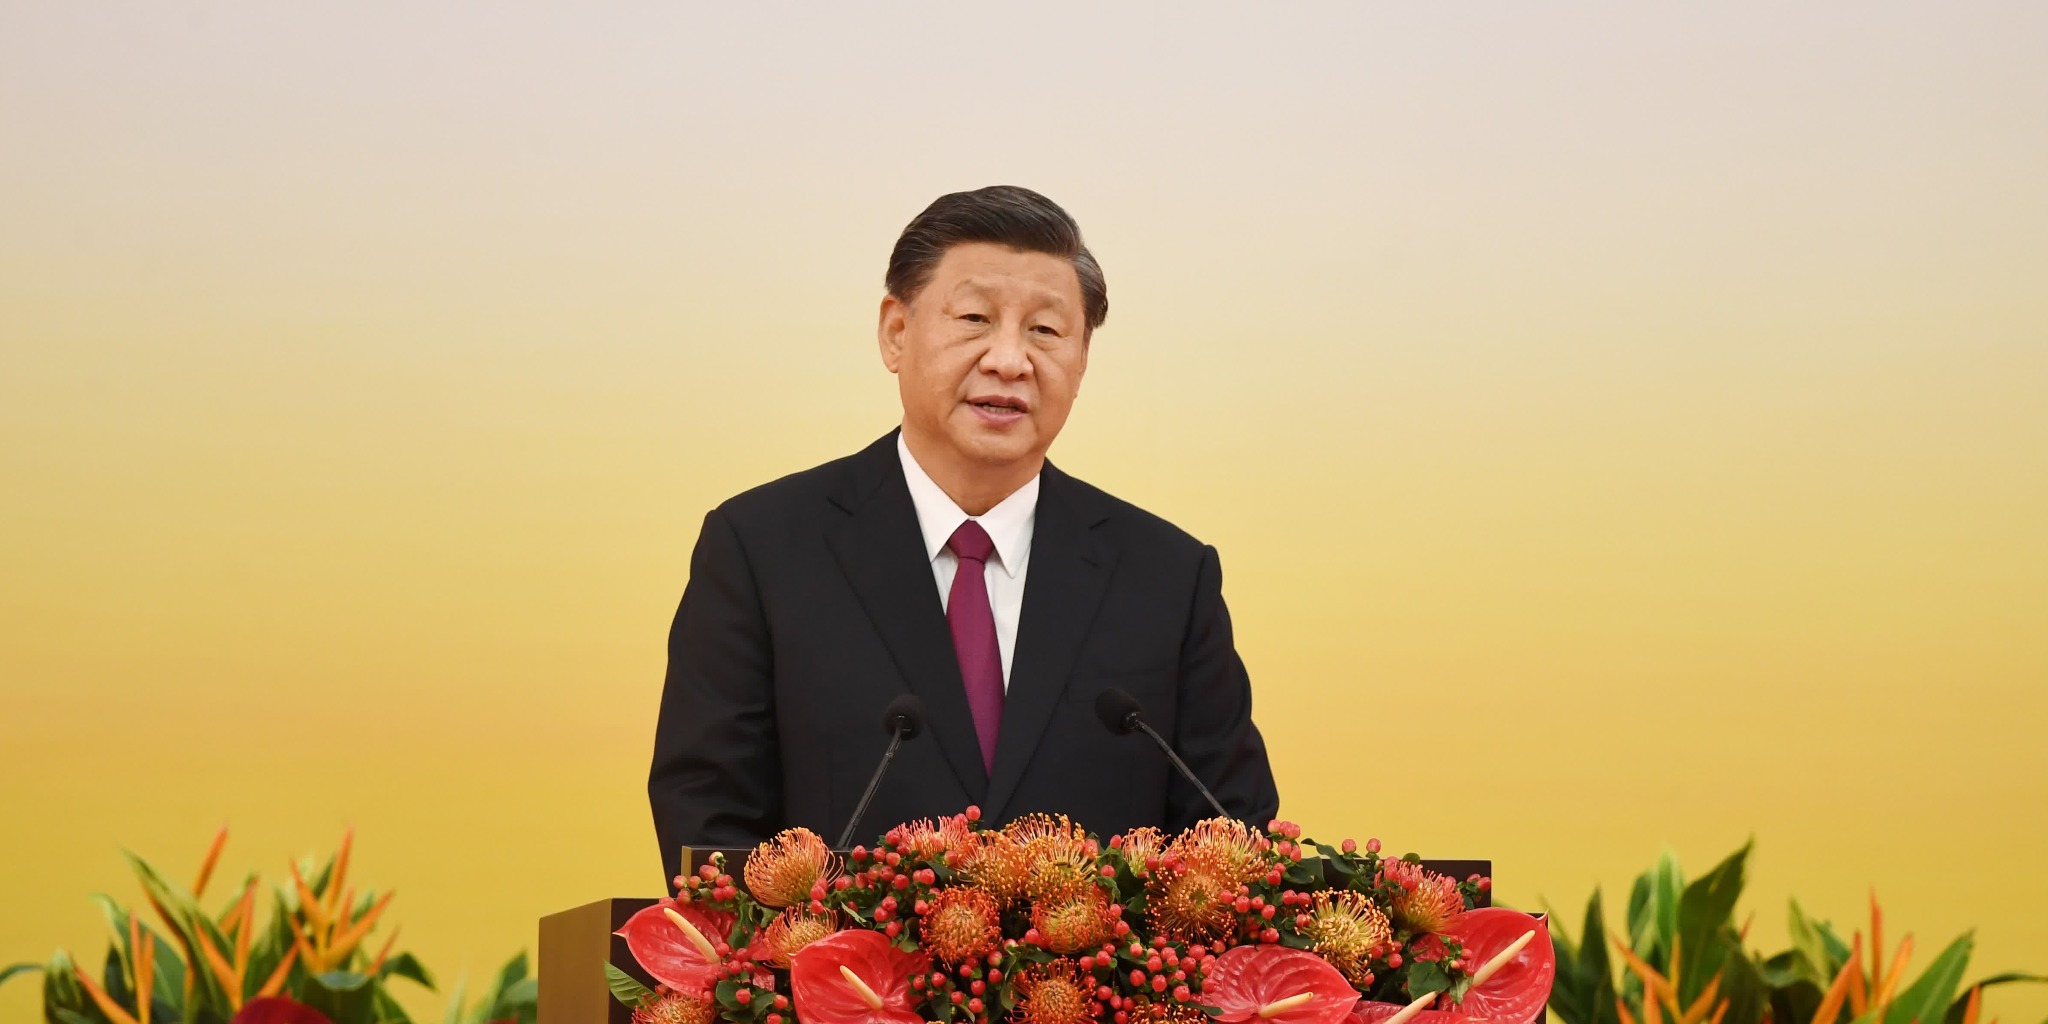 Full Text | President Xi's address at HKSAR anniversary meeting, inaugural ceremony of sixth-term government of HKSAR